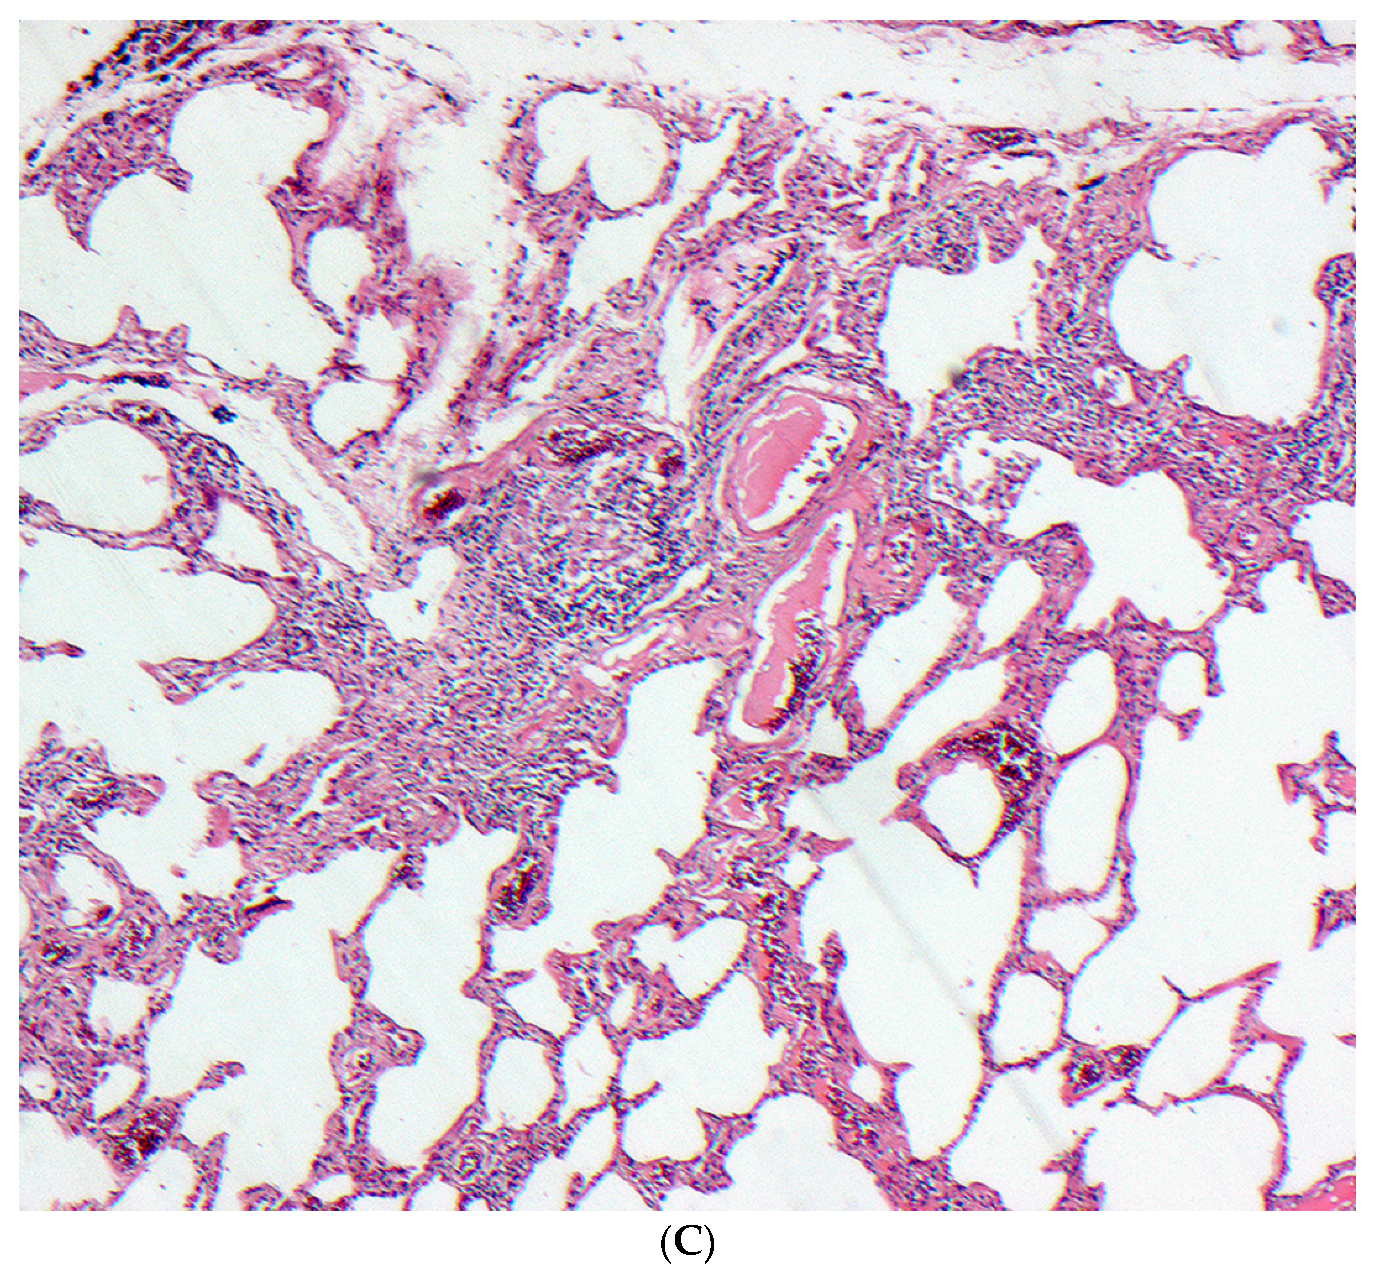 A histological slide of lung tissue shows open airspaces in the majority of the field of view but speta appear swollen and darker lines of tissue indicate the presence of fibrotic material.